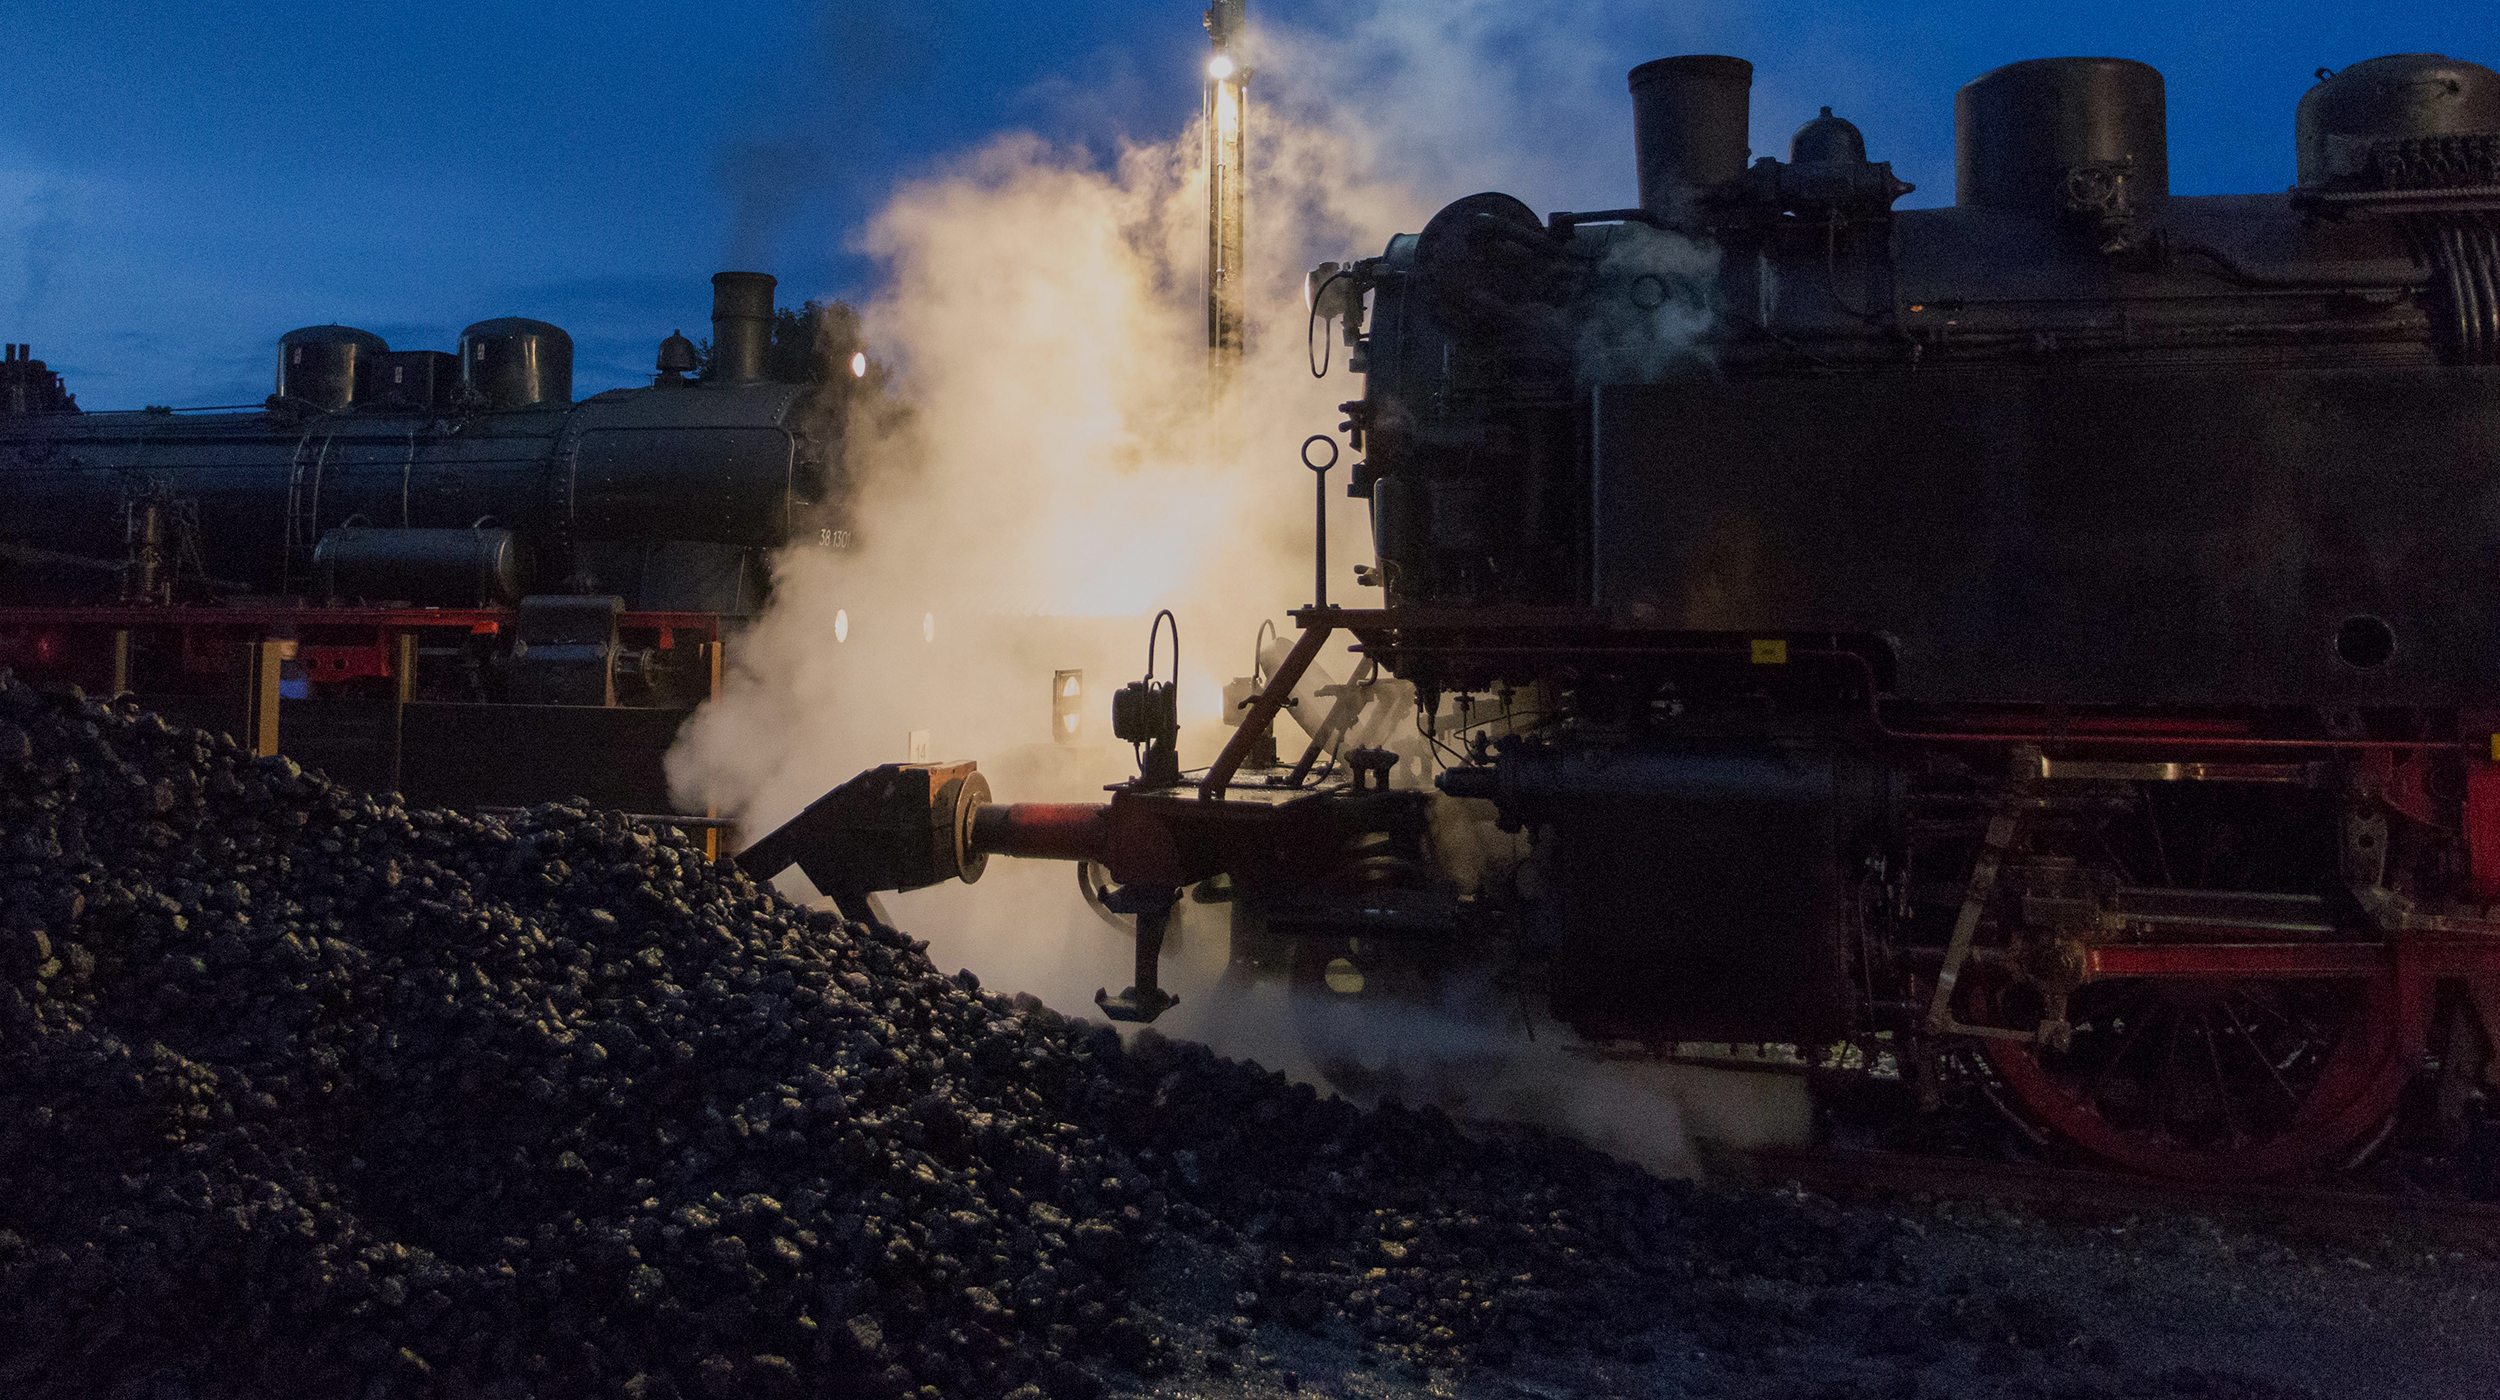 Two steam locomotives and a pile of coal at night